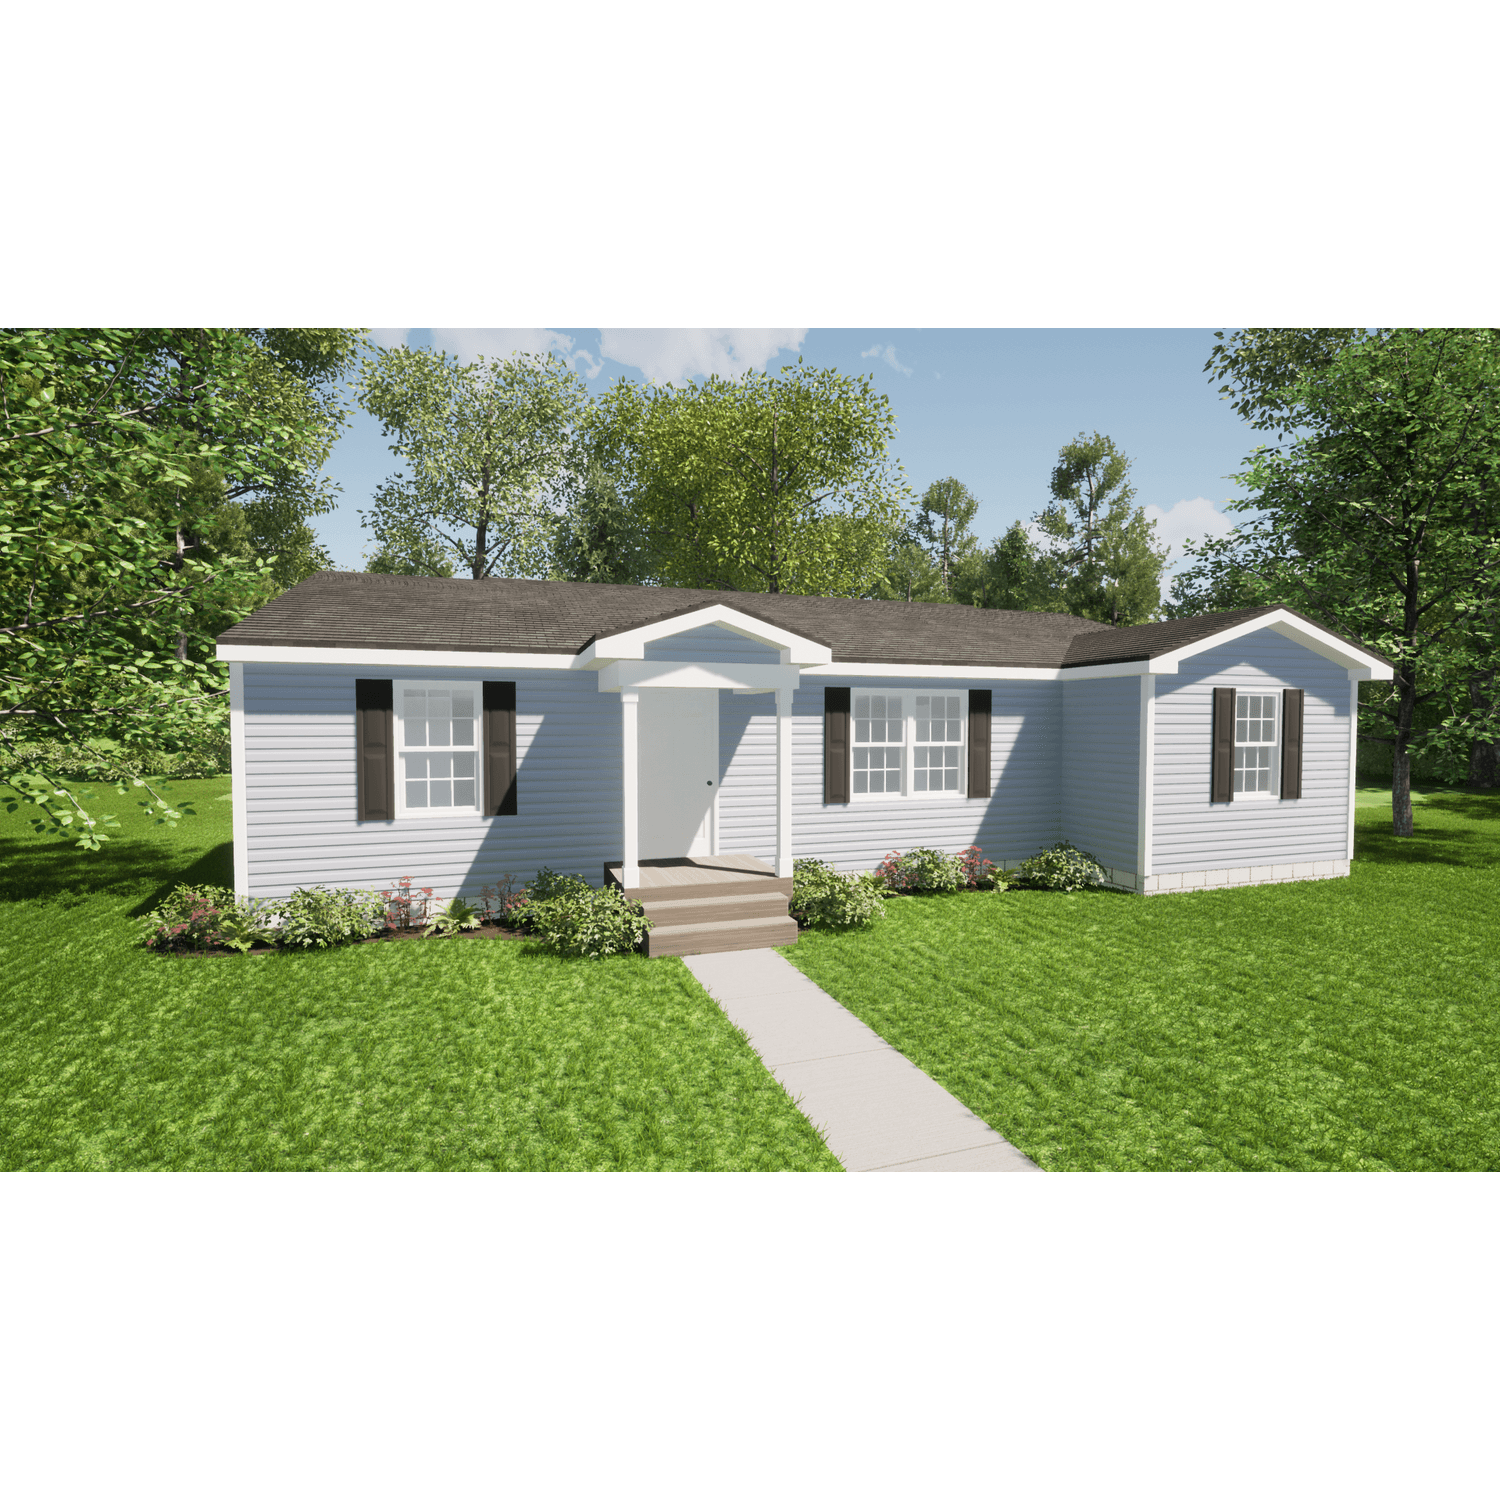 1. Single Family for Sale at Valuebuild Homes - Greenville Nc - Build On Your L 3015 Jefferson Davis Highway (Us1), Greenville, NC 27858